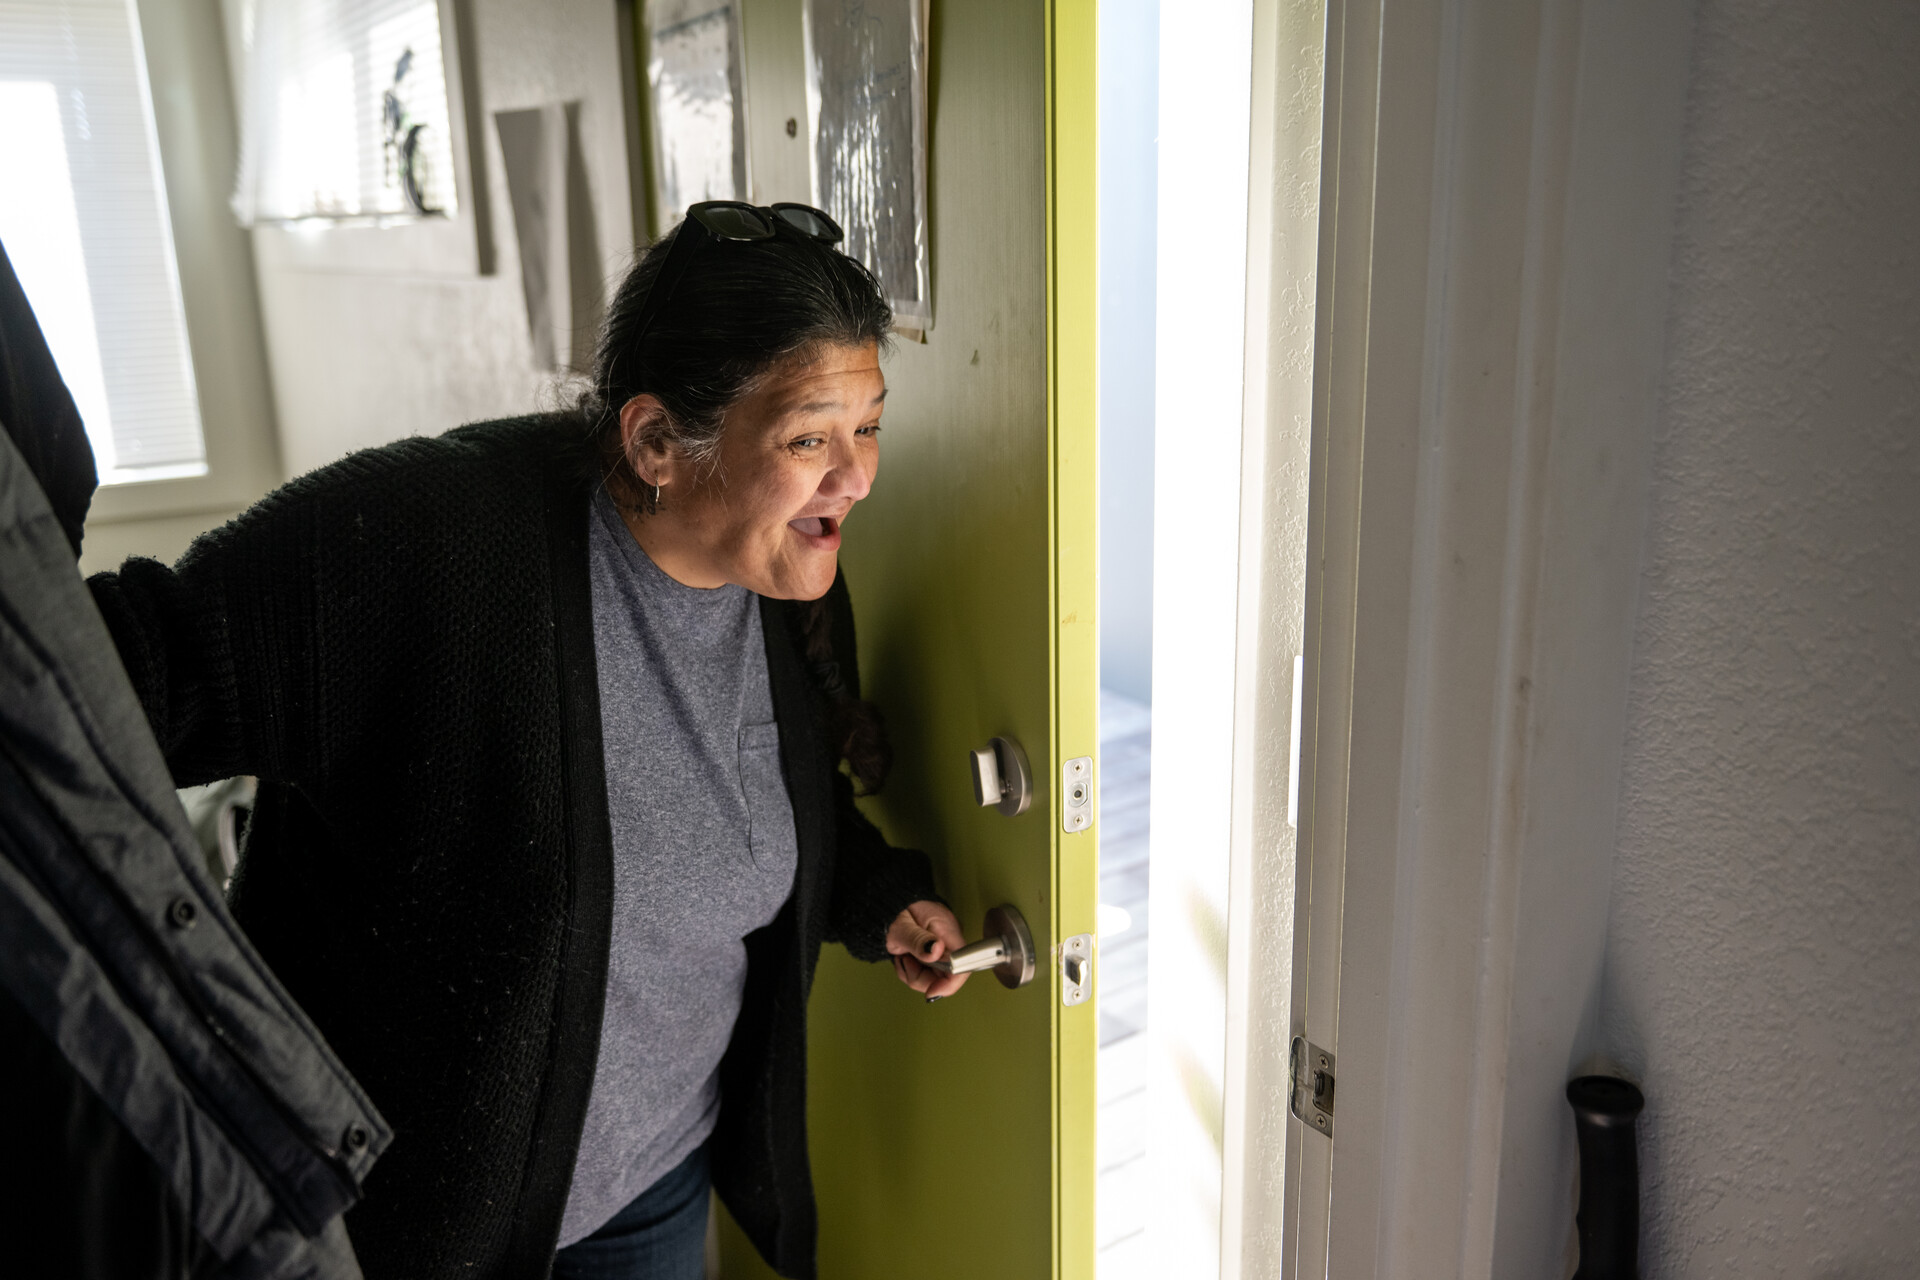 An older Latina woman, with short, graying black hair, wearing a gray T-shirt and a long-sleeved black cardigan, leans forward and smiles as she opens a bright yellow door.